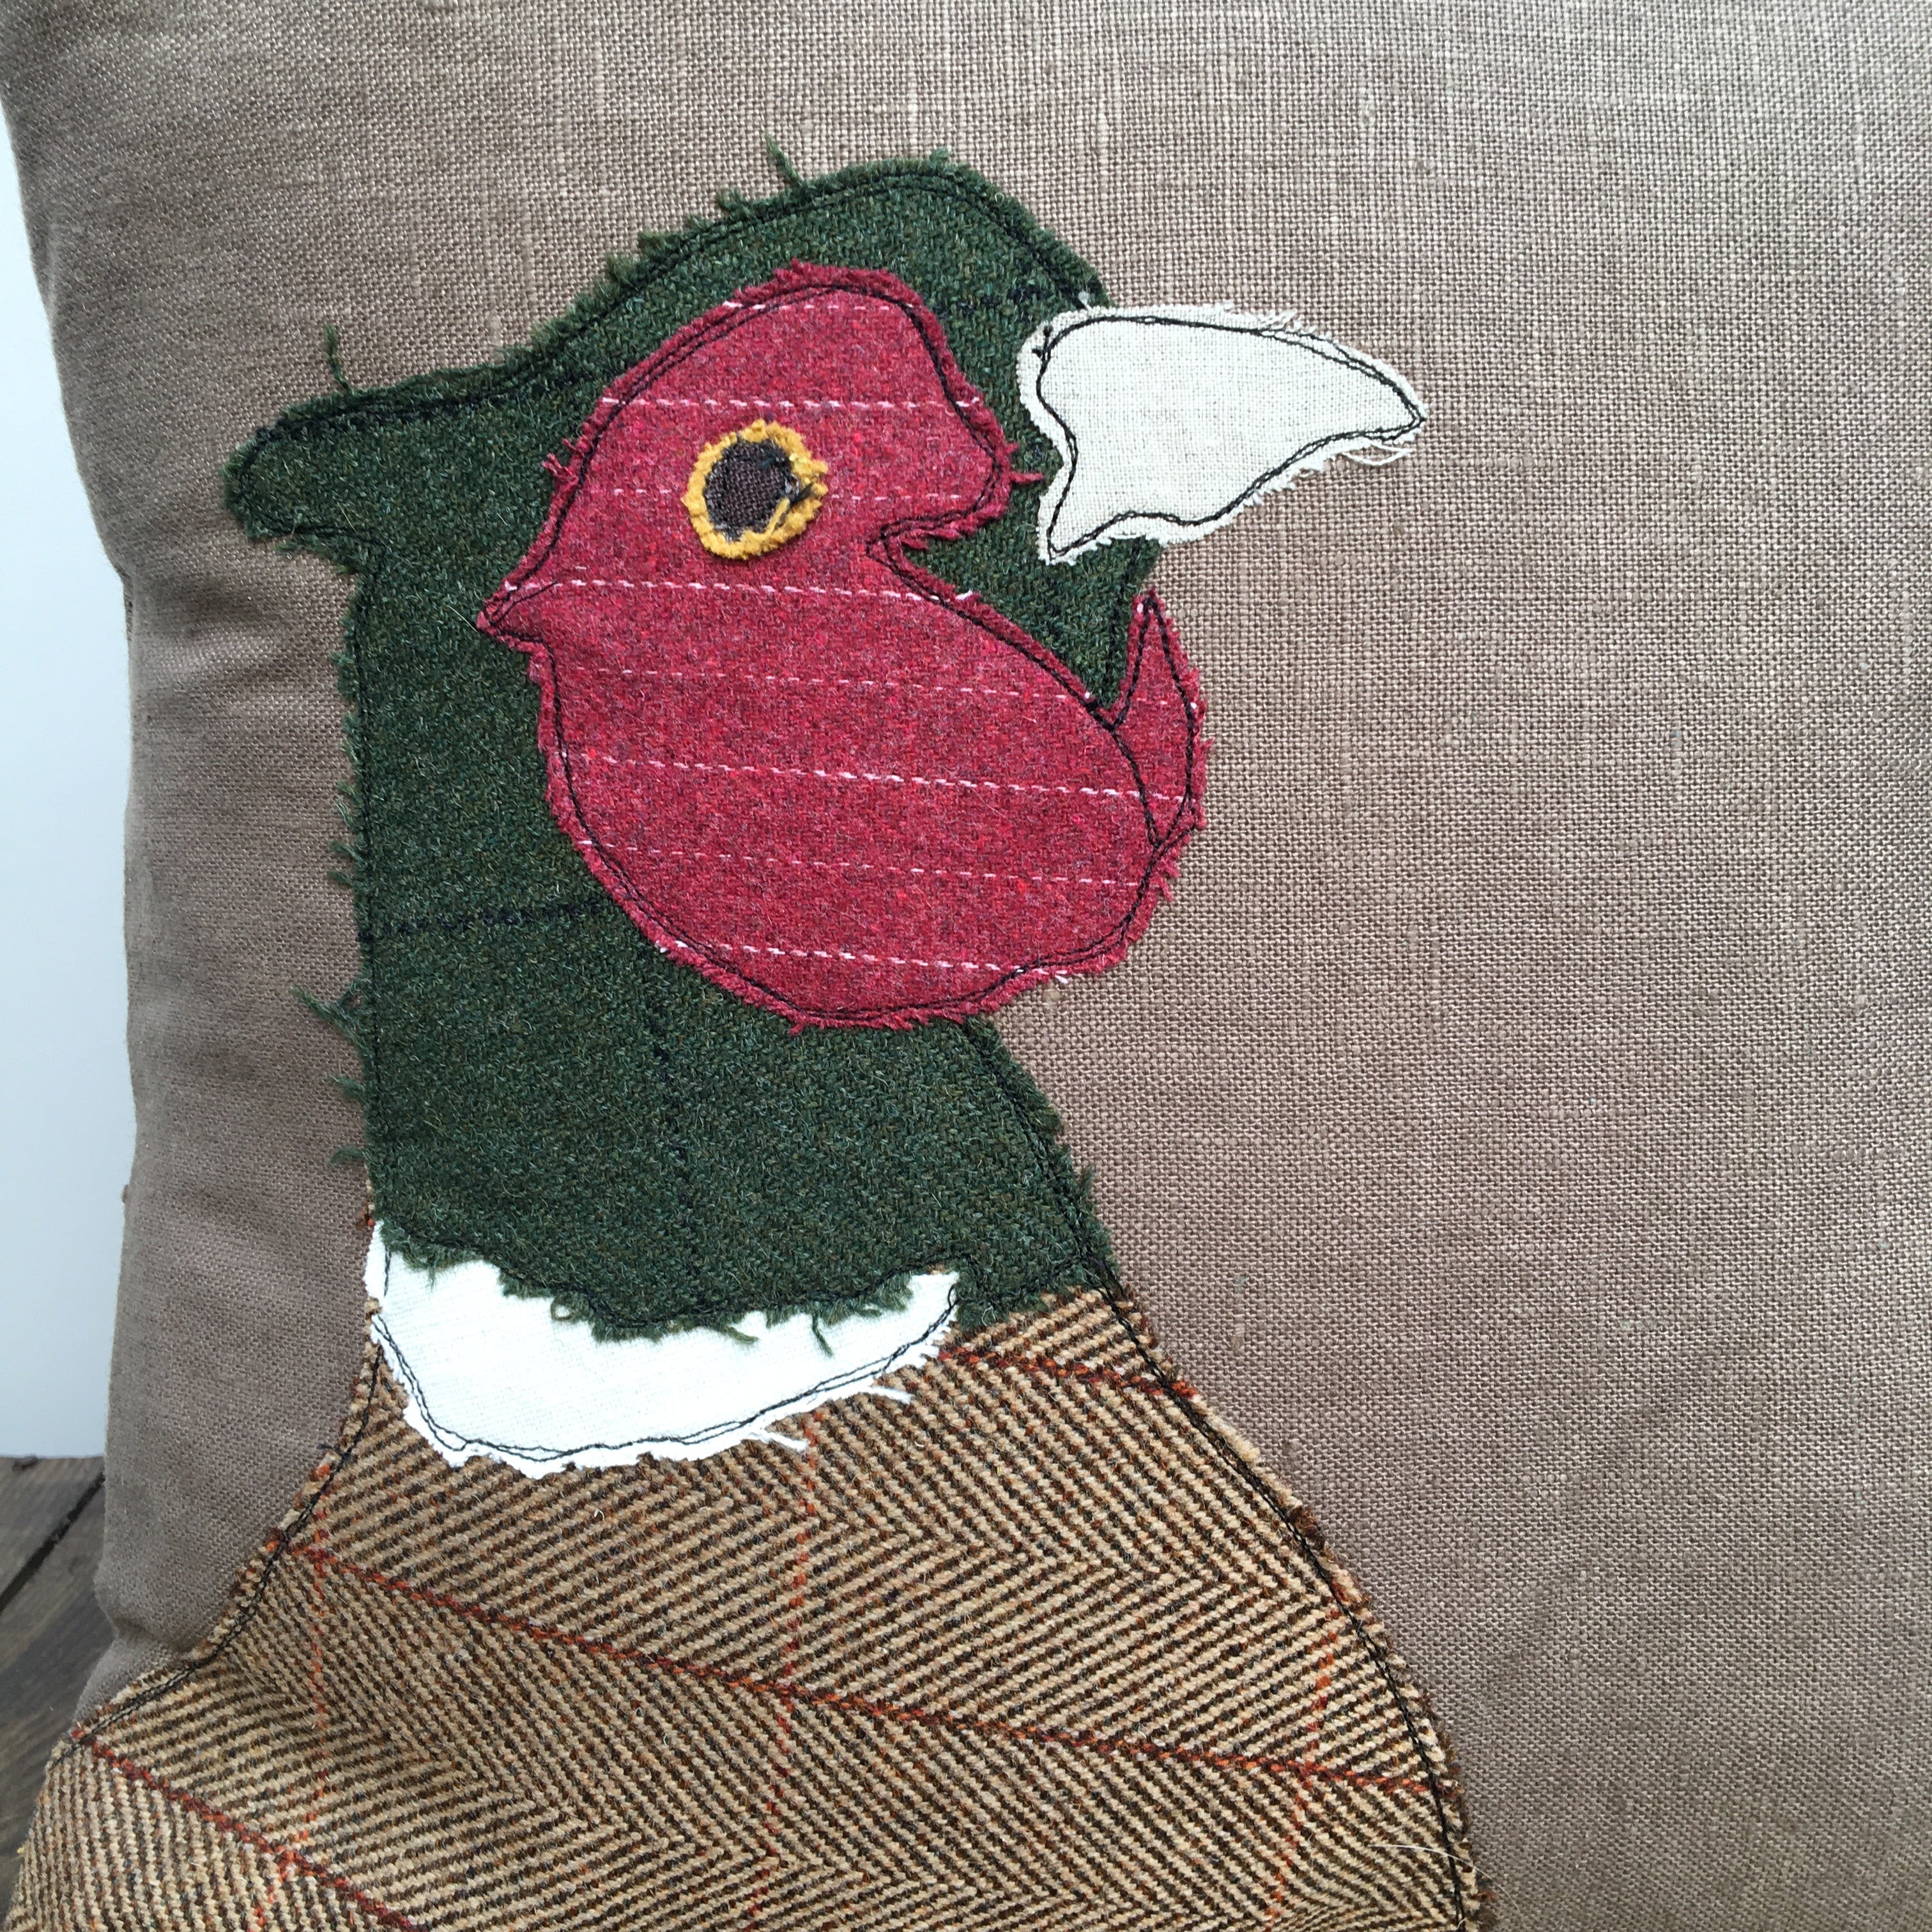 GREGORY Pheasant Cushion Cover